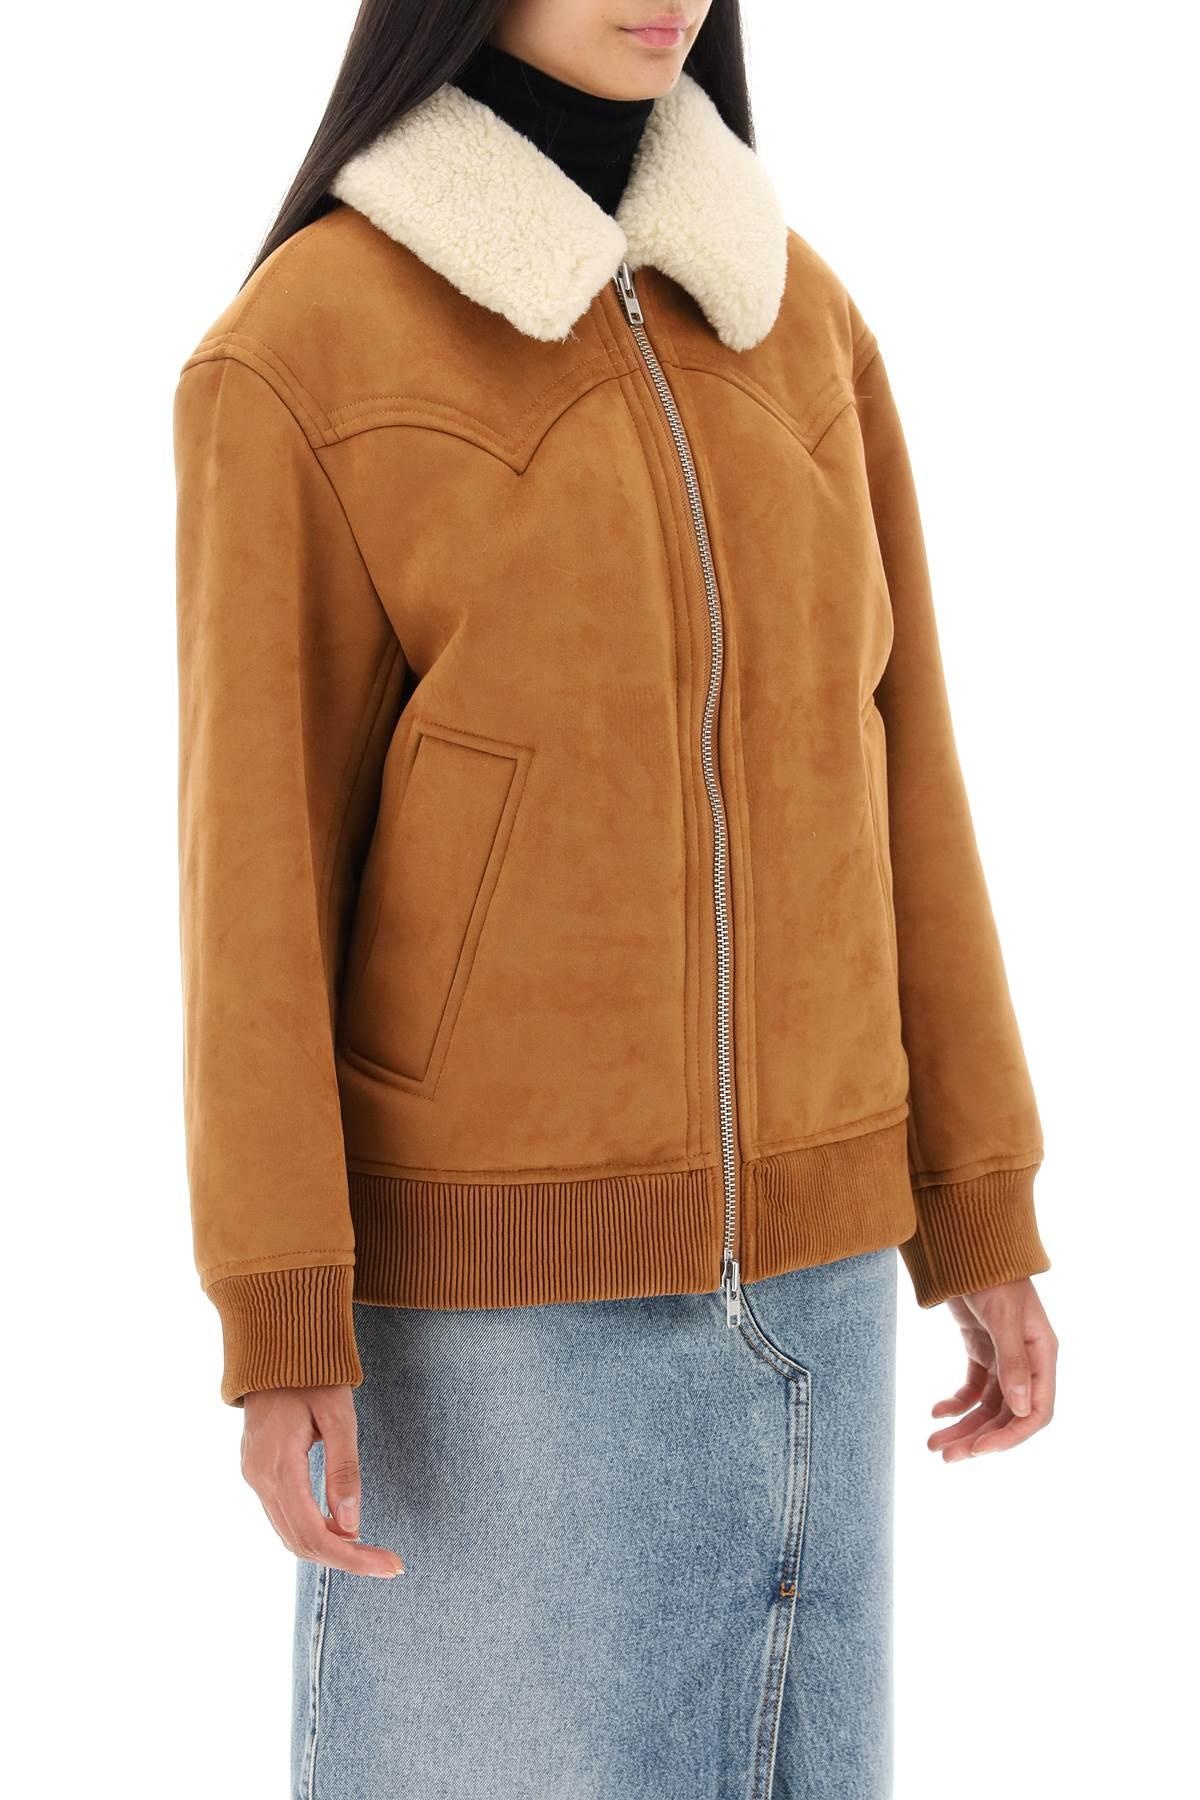 Stand Studio Lillee Eco Shearling Bomber Jacket - 3